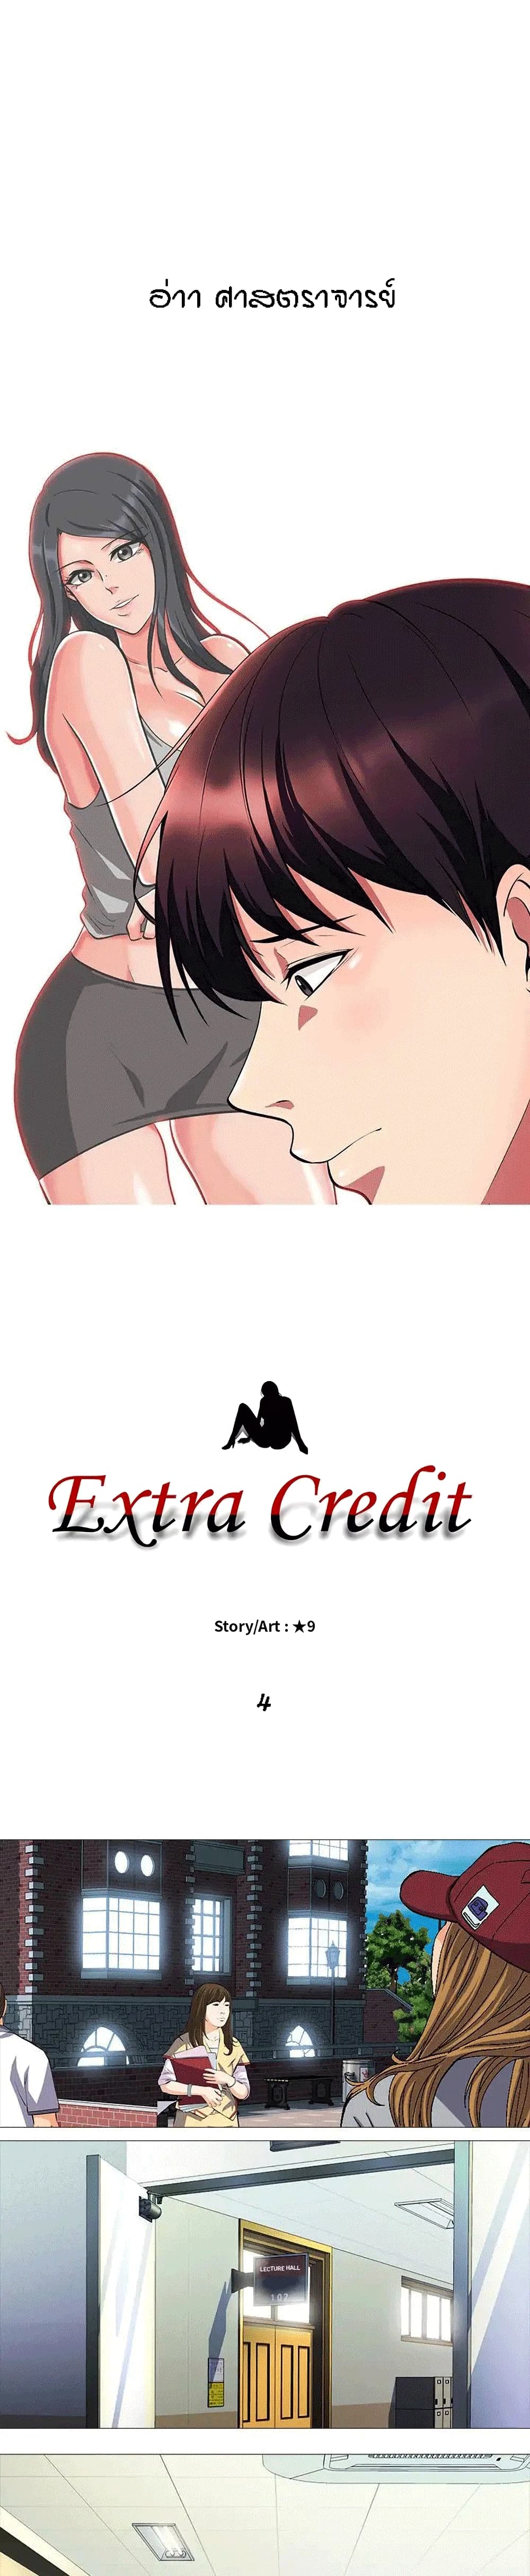 Extra-Credit-Chapter4-1.jpg